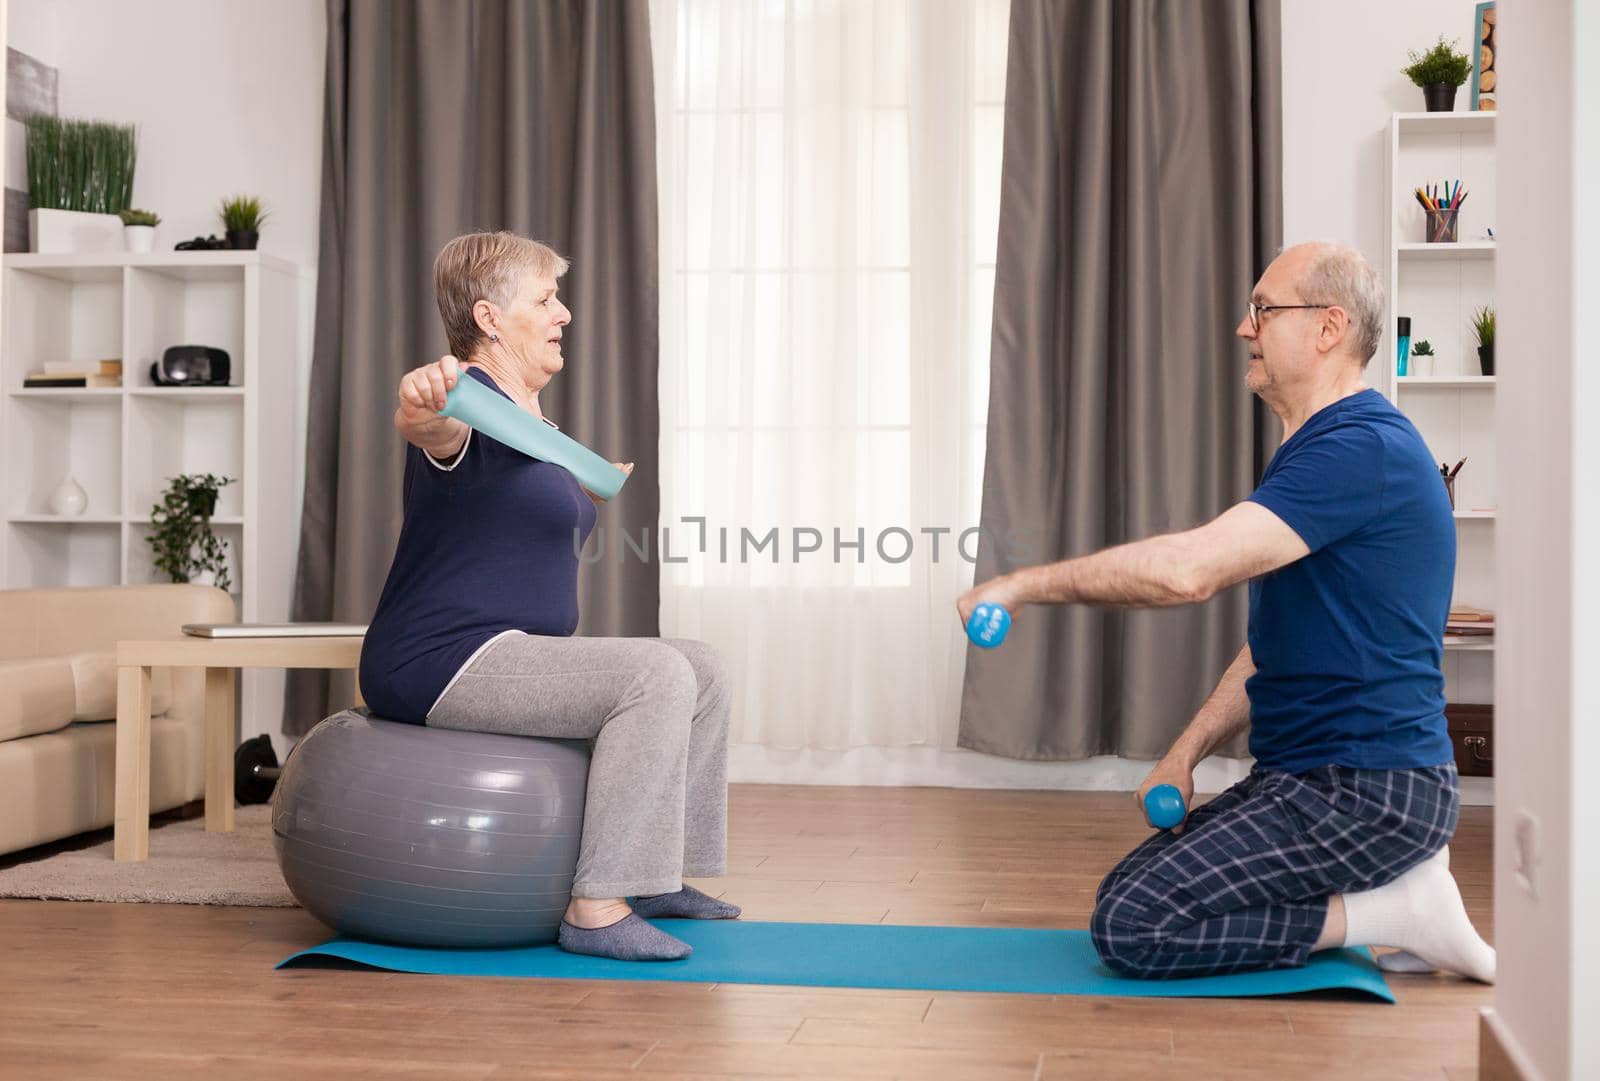 Cheerful senior couple training together on yoga mat. Old person healthy lifestyle exercise at home, workout and training, sport activity at home.